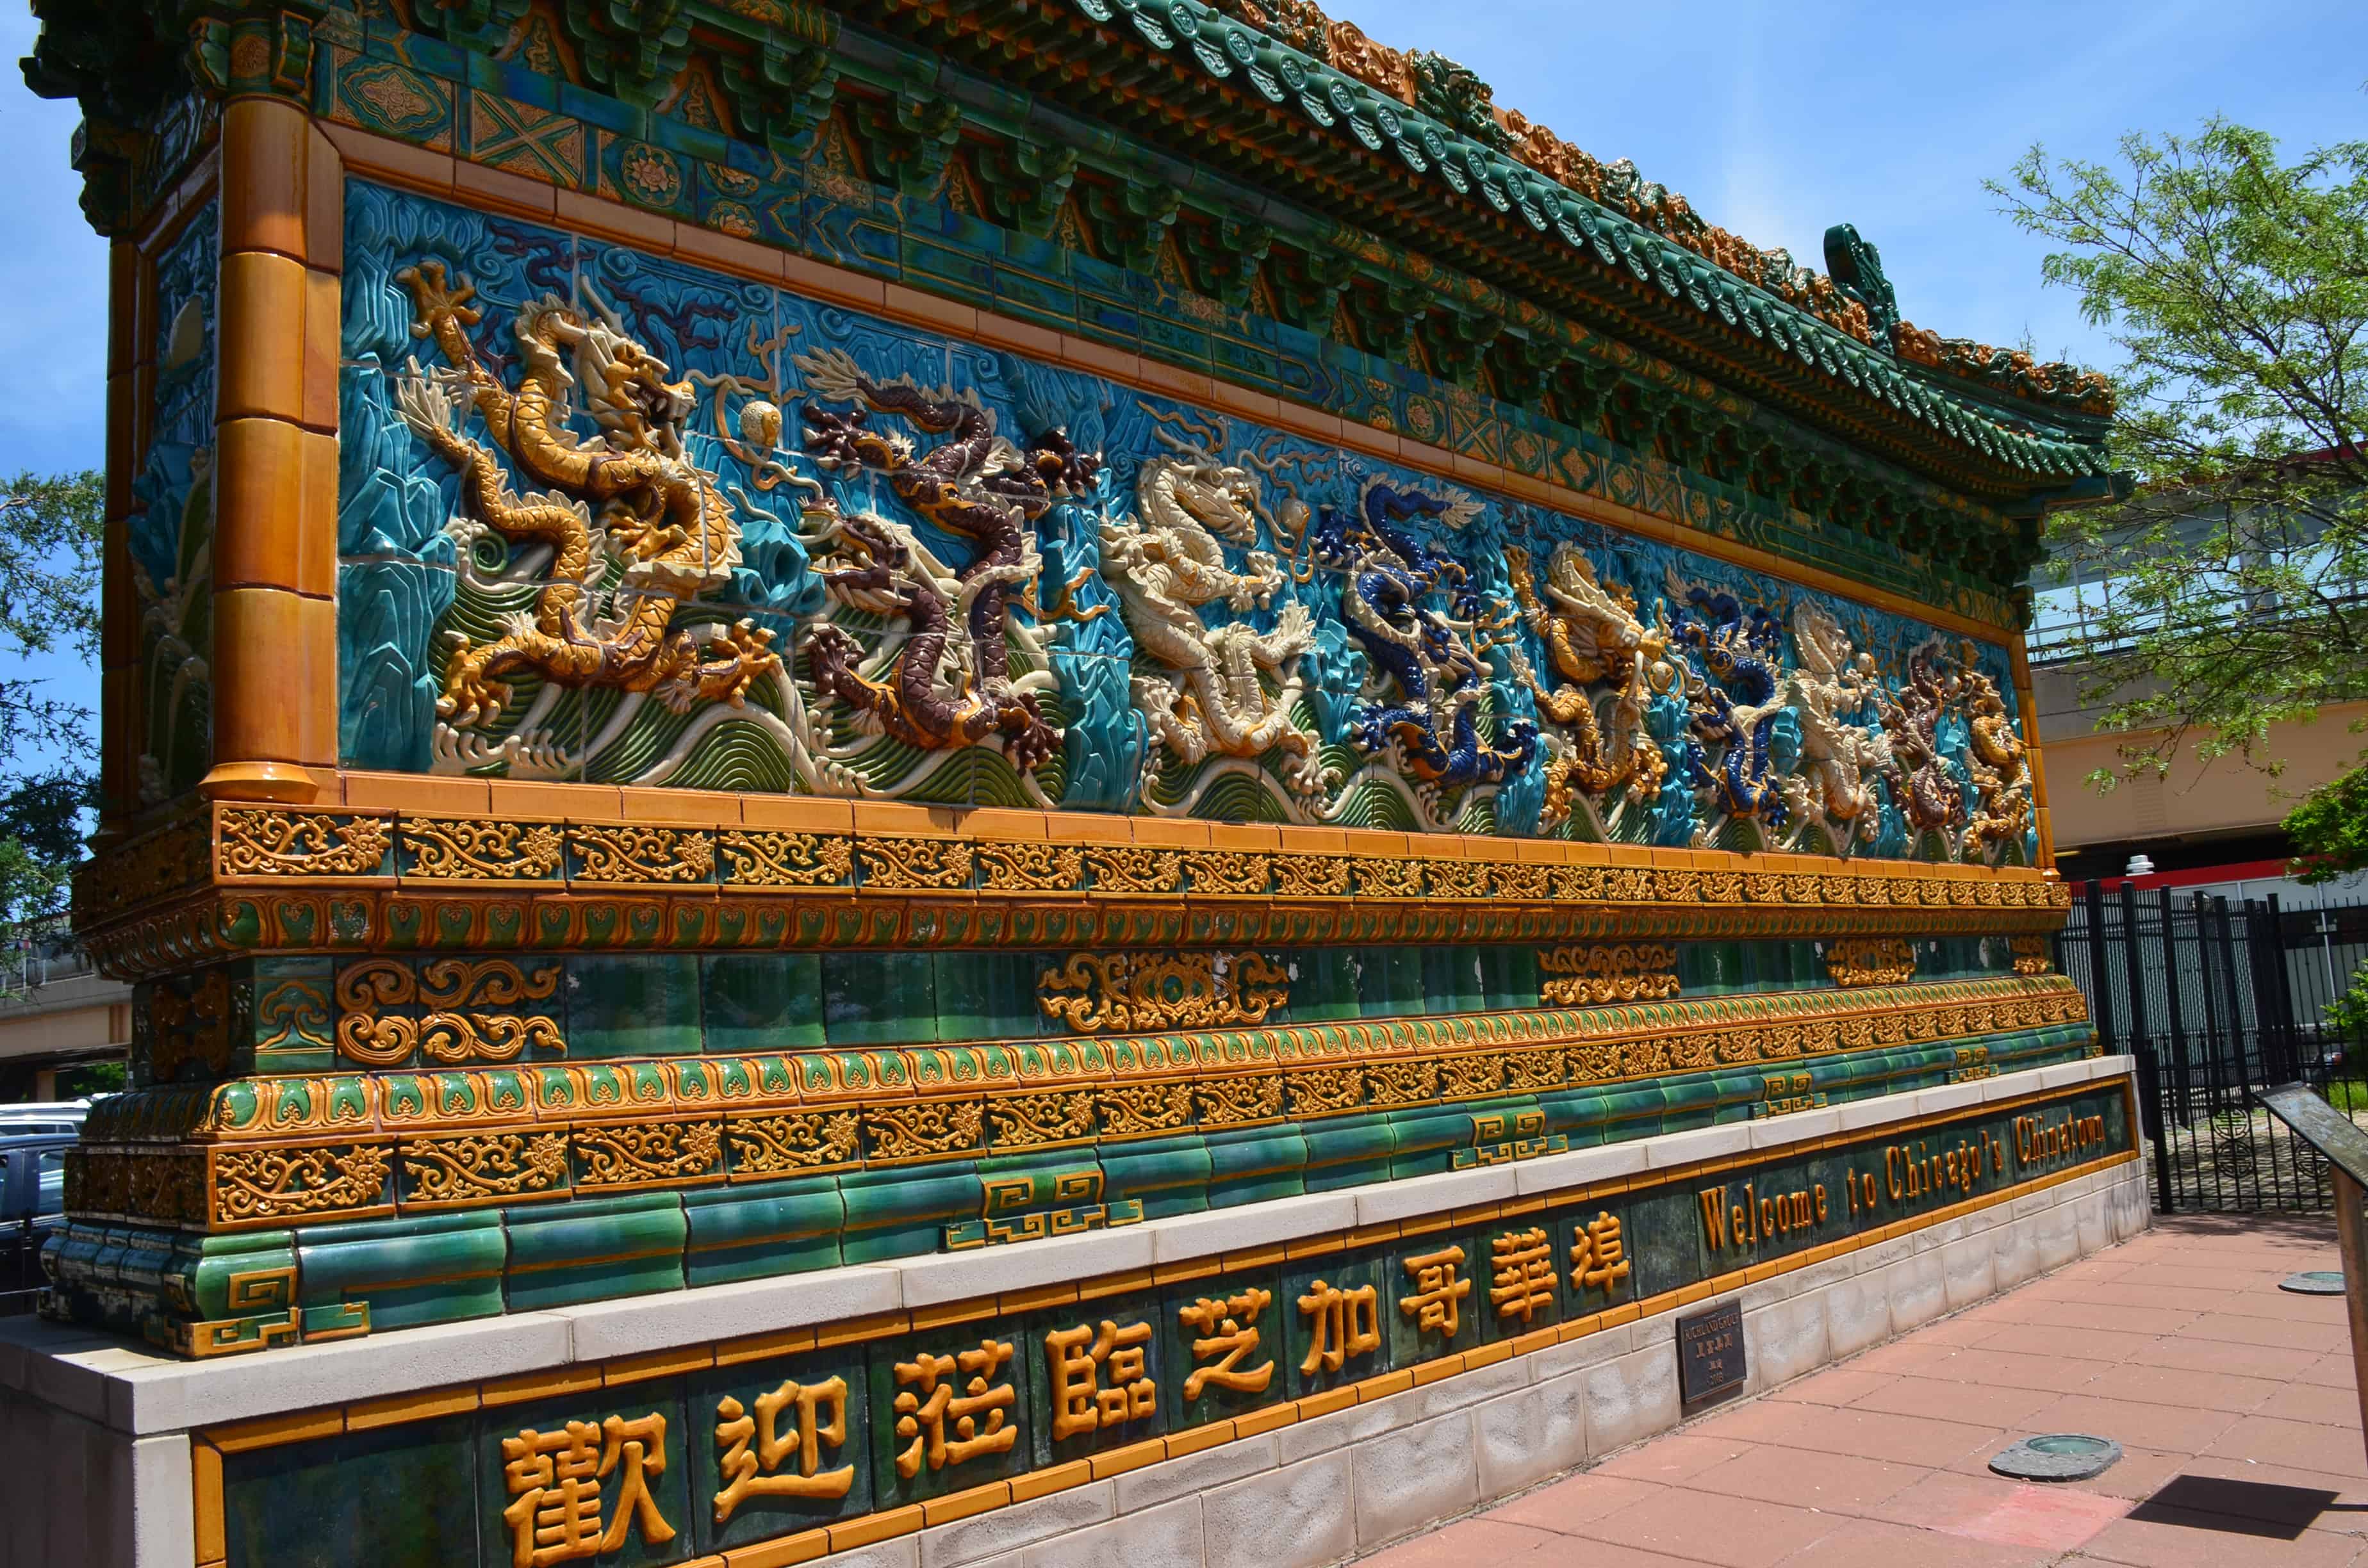 Nine Dragon Wall in Chinatown, Chicago, Illinois